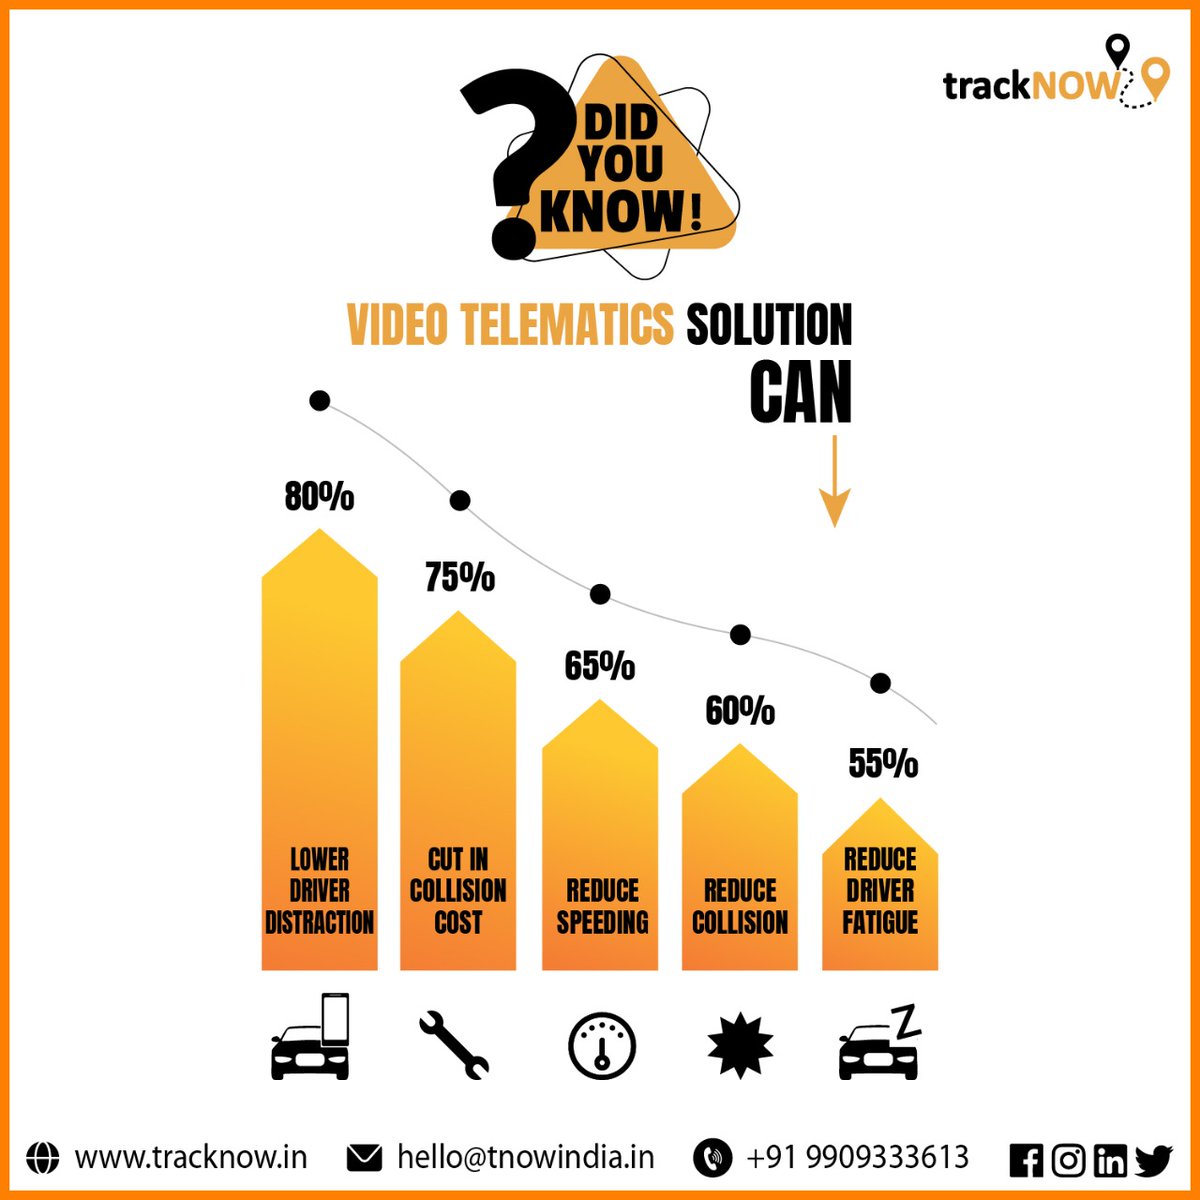 #DidYouKnow
Telematics is now being primarily used in India by fleet management businesses like taxi services, logistics firms,etc💁Telematics Solution Can👇

#videotelematicssolutions #ai #revolutionizingdriverbehavior 
#tracknow #VideoTelematics #fleettracking #fleetsafety